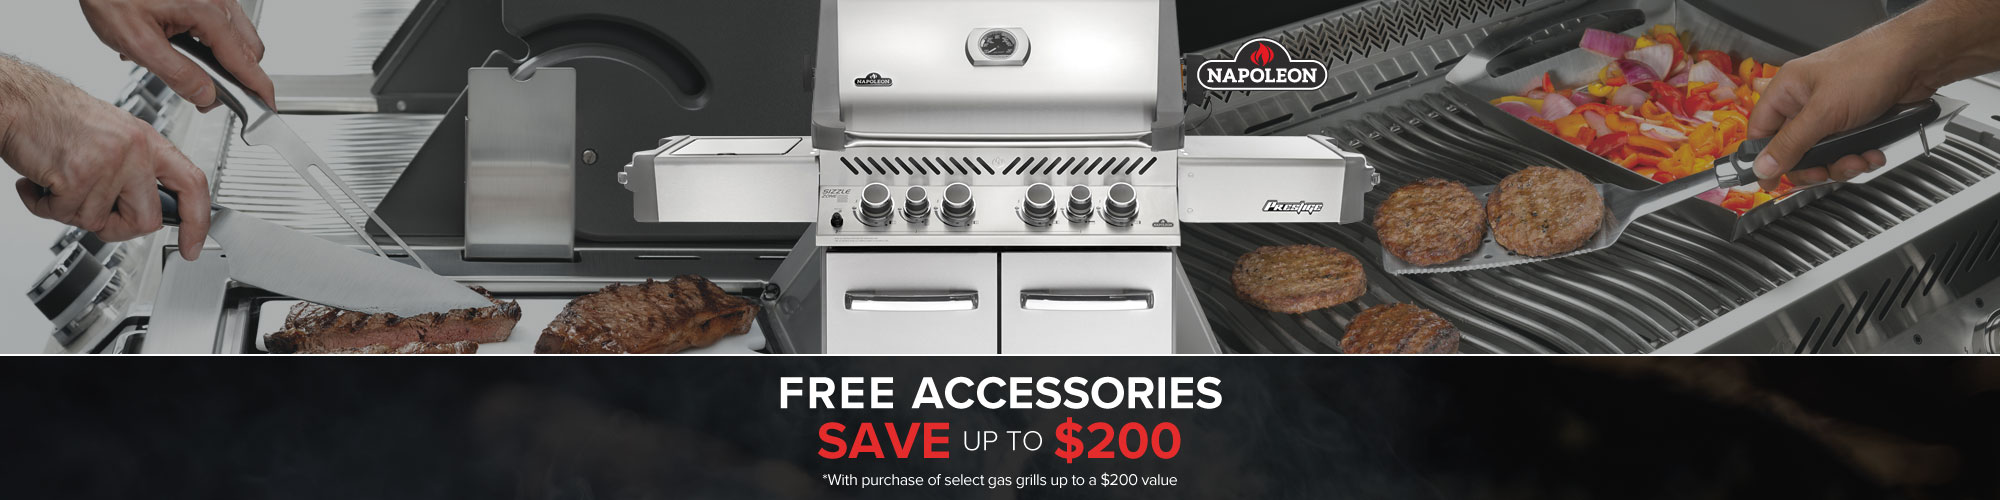 Shop Napoleon for your gas grills, grilling tools, grilling accessories & grill covers at Sun & Ski.